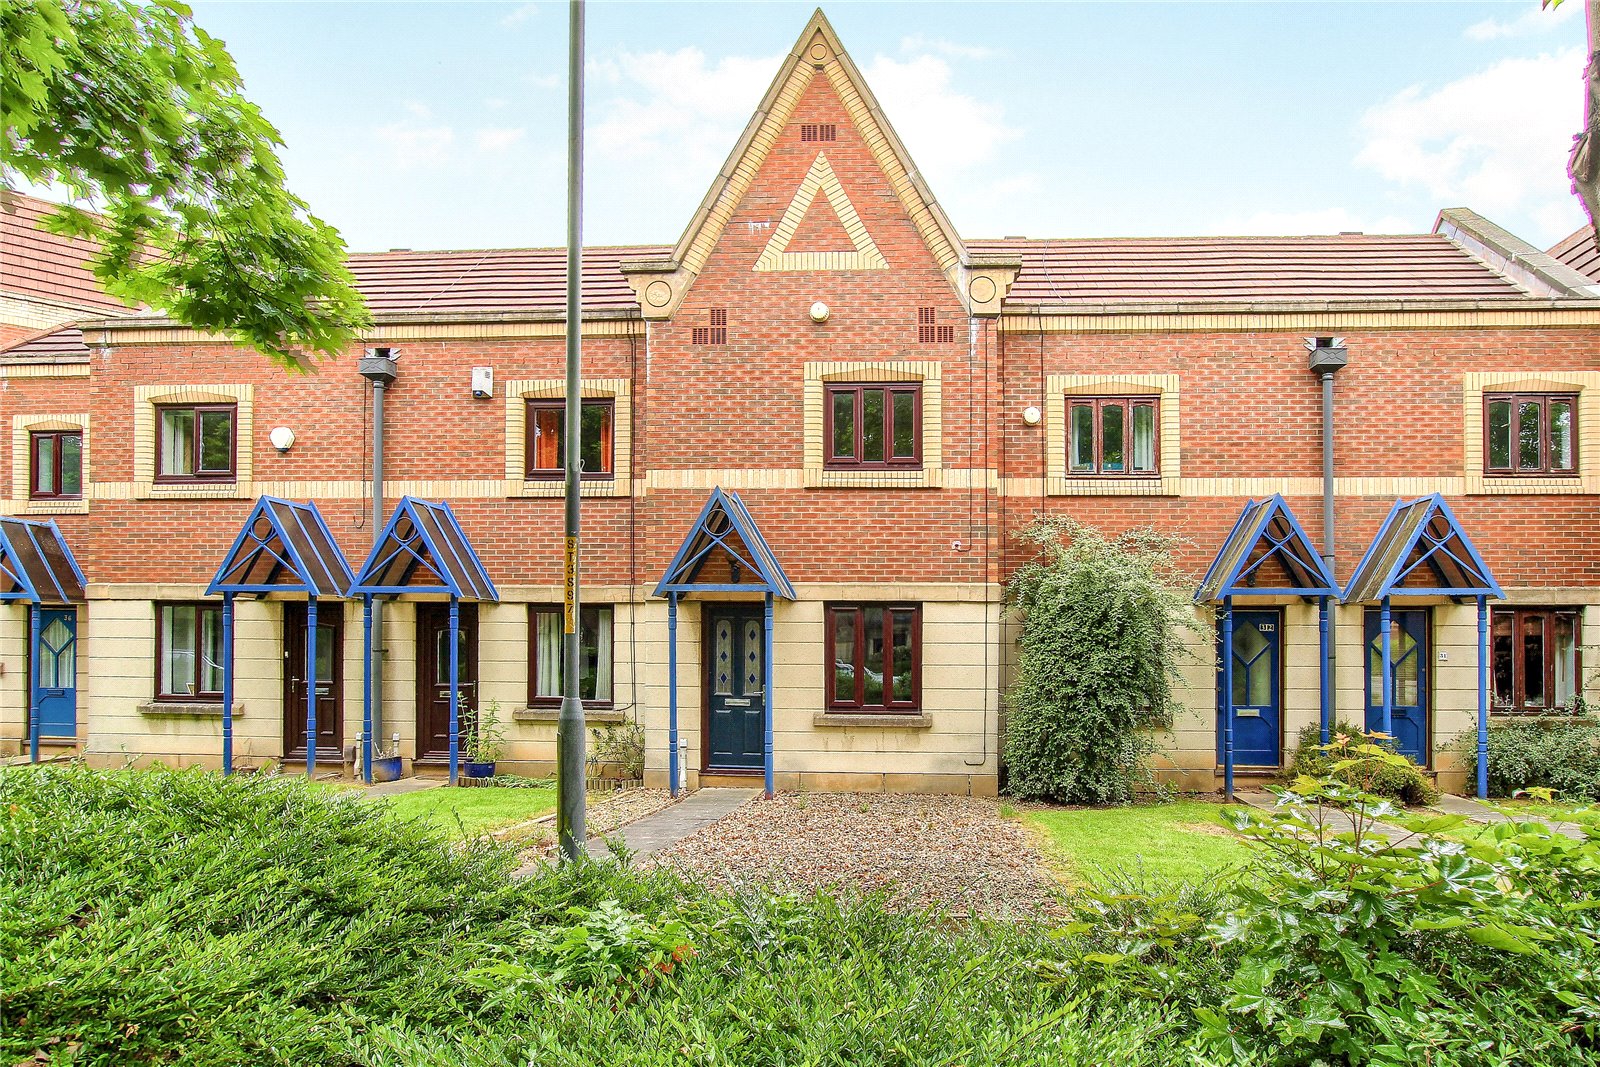 2 bed house for sale - Property Image 1